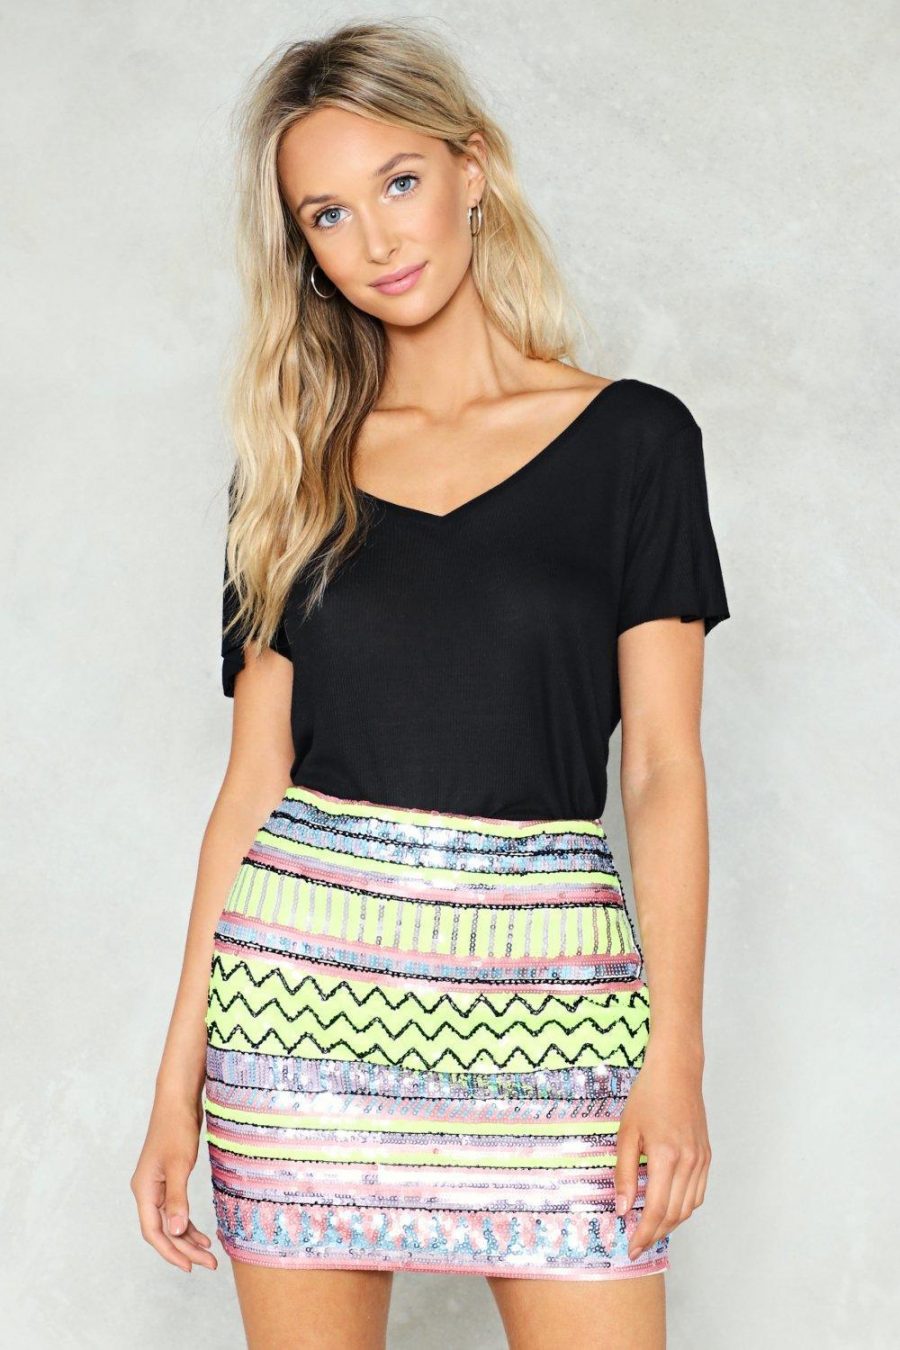 See Need Want Fashion Trend Sequinned Skirt Nasty Gal